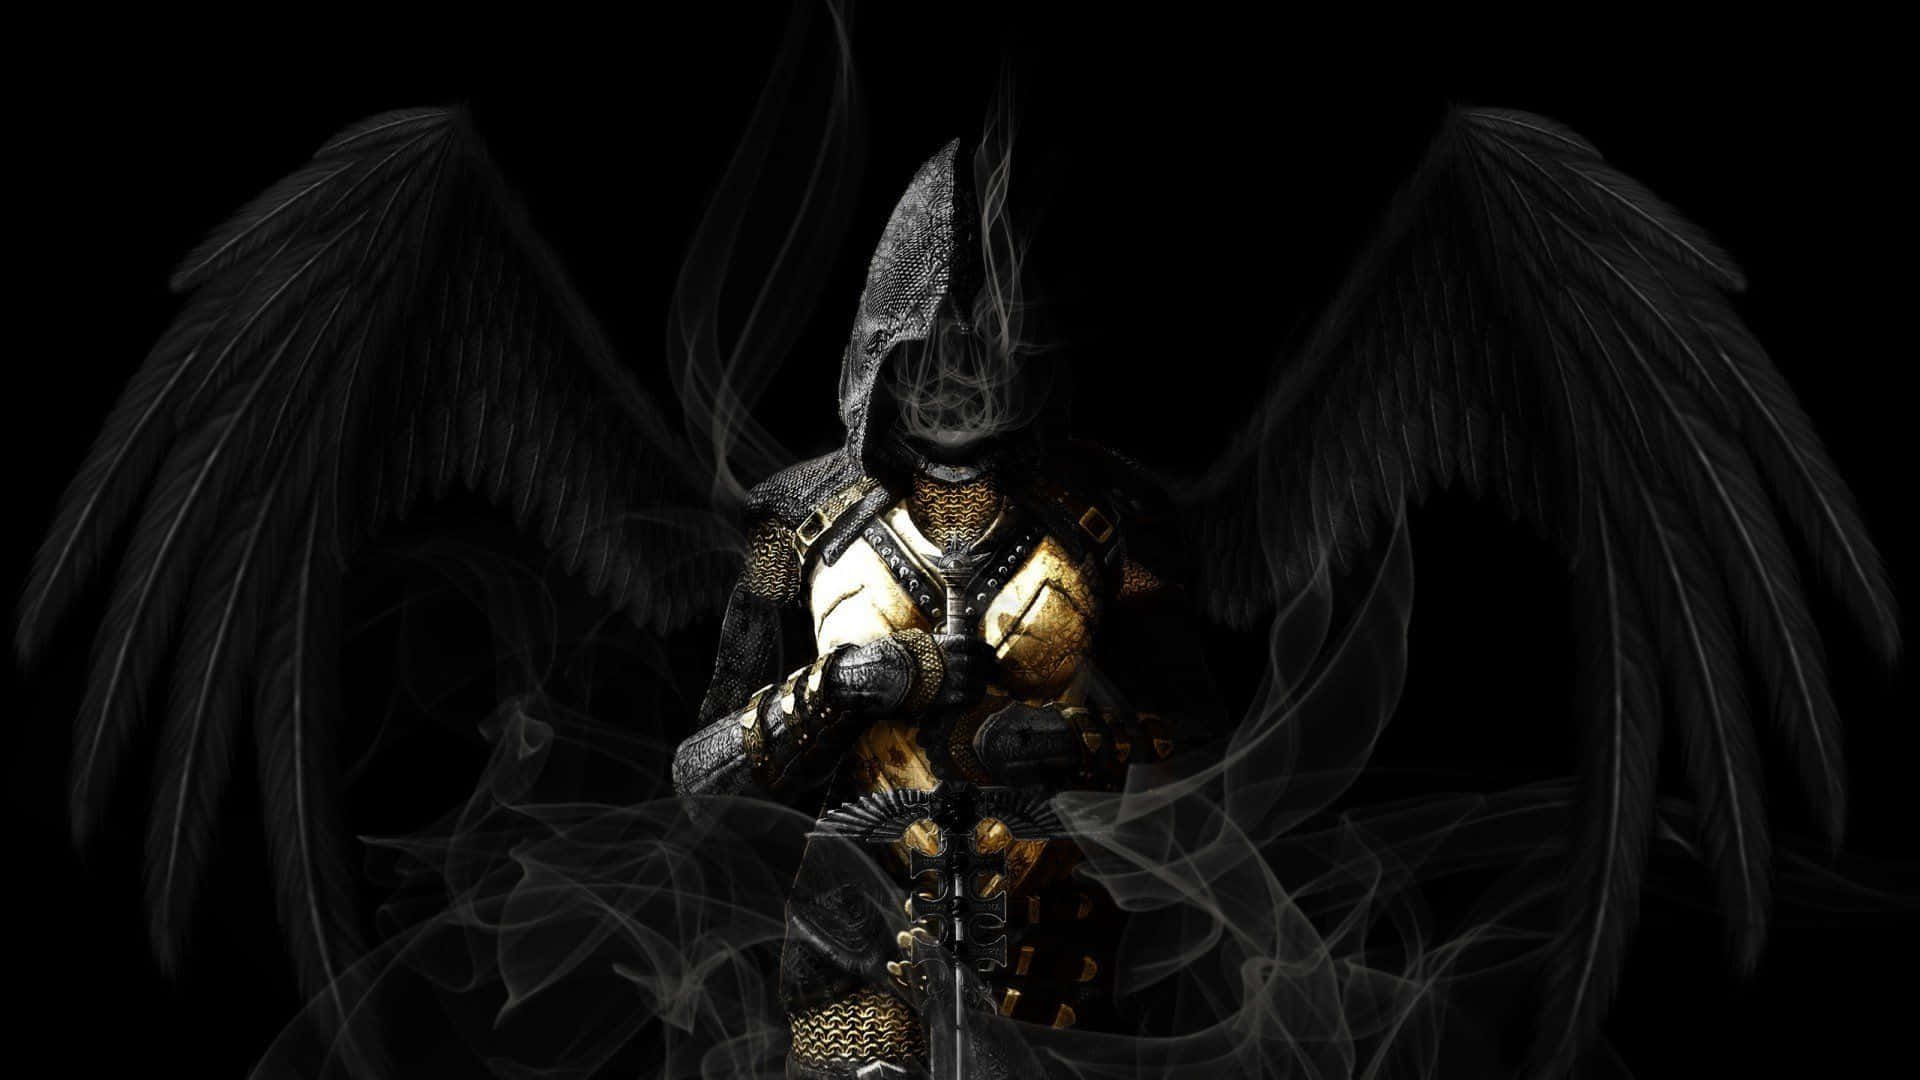 A Black Angel With Wings Standing In The Smoke